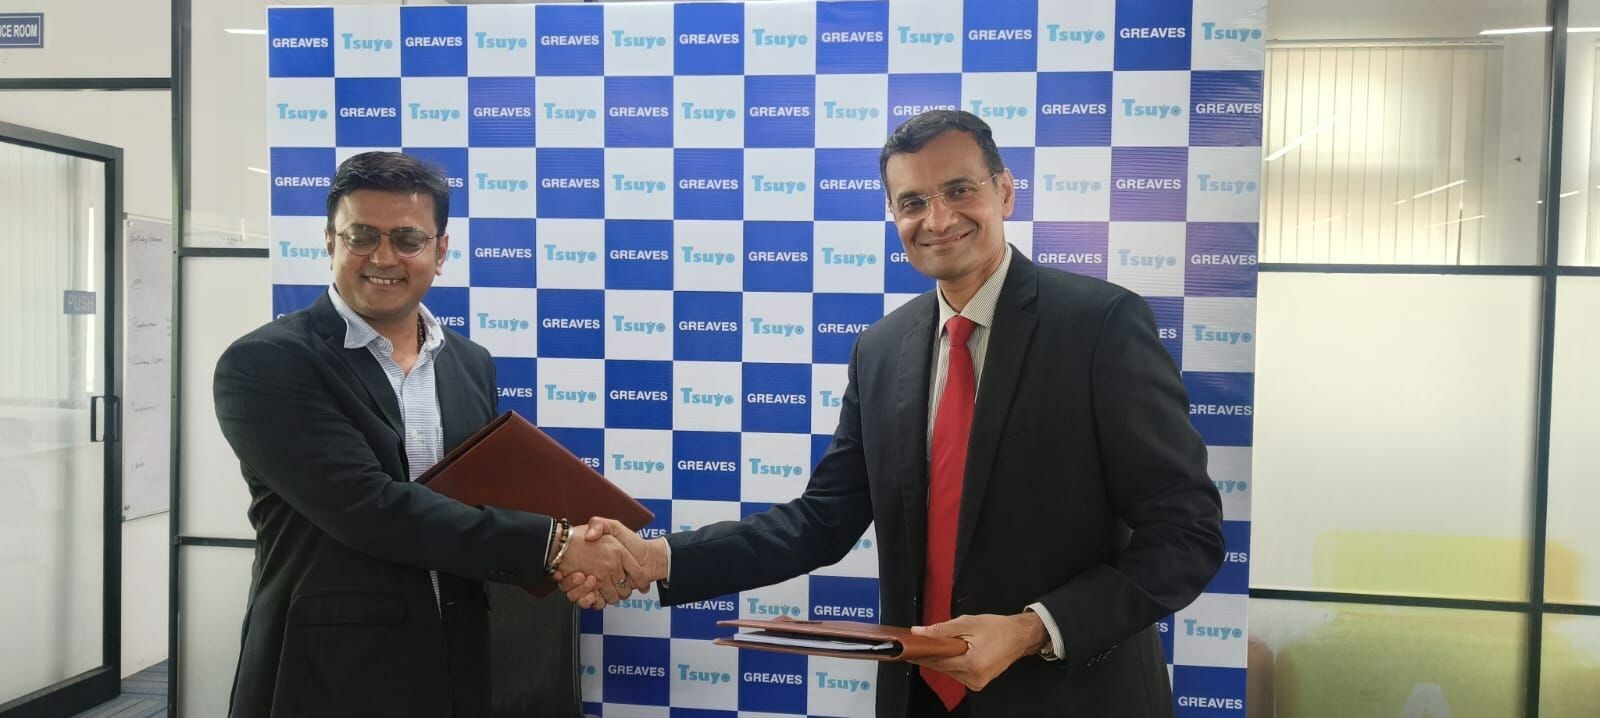 Greaves Cotton Limited enters into a Technology Transfer Agreement with Tsuyo, to manufacture components designed for low-speed 3-wheelers